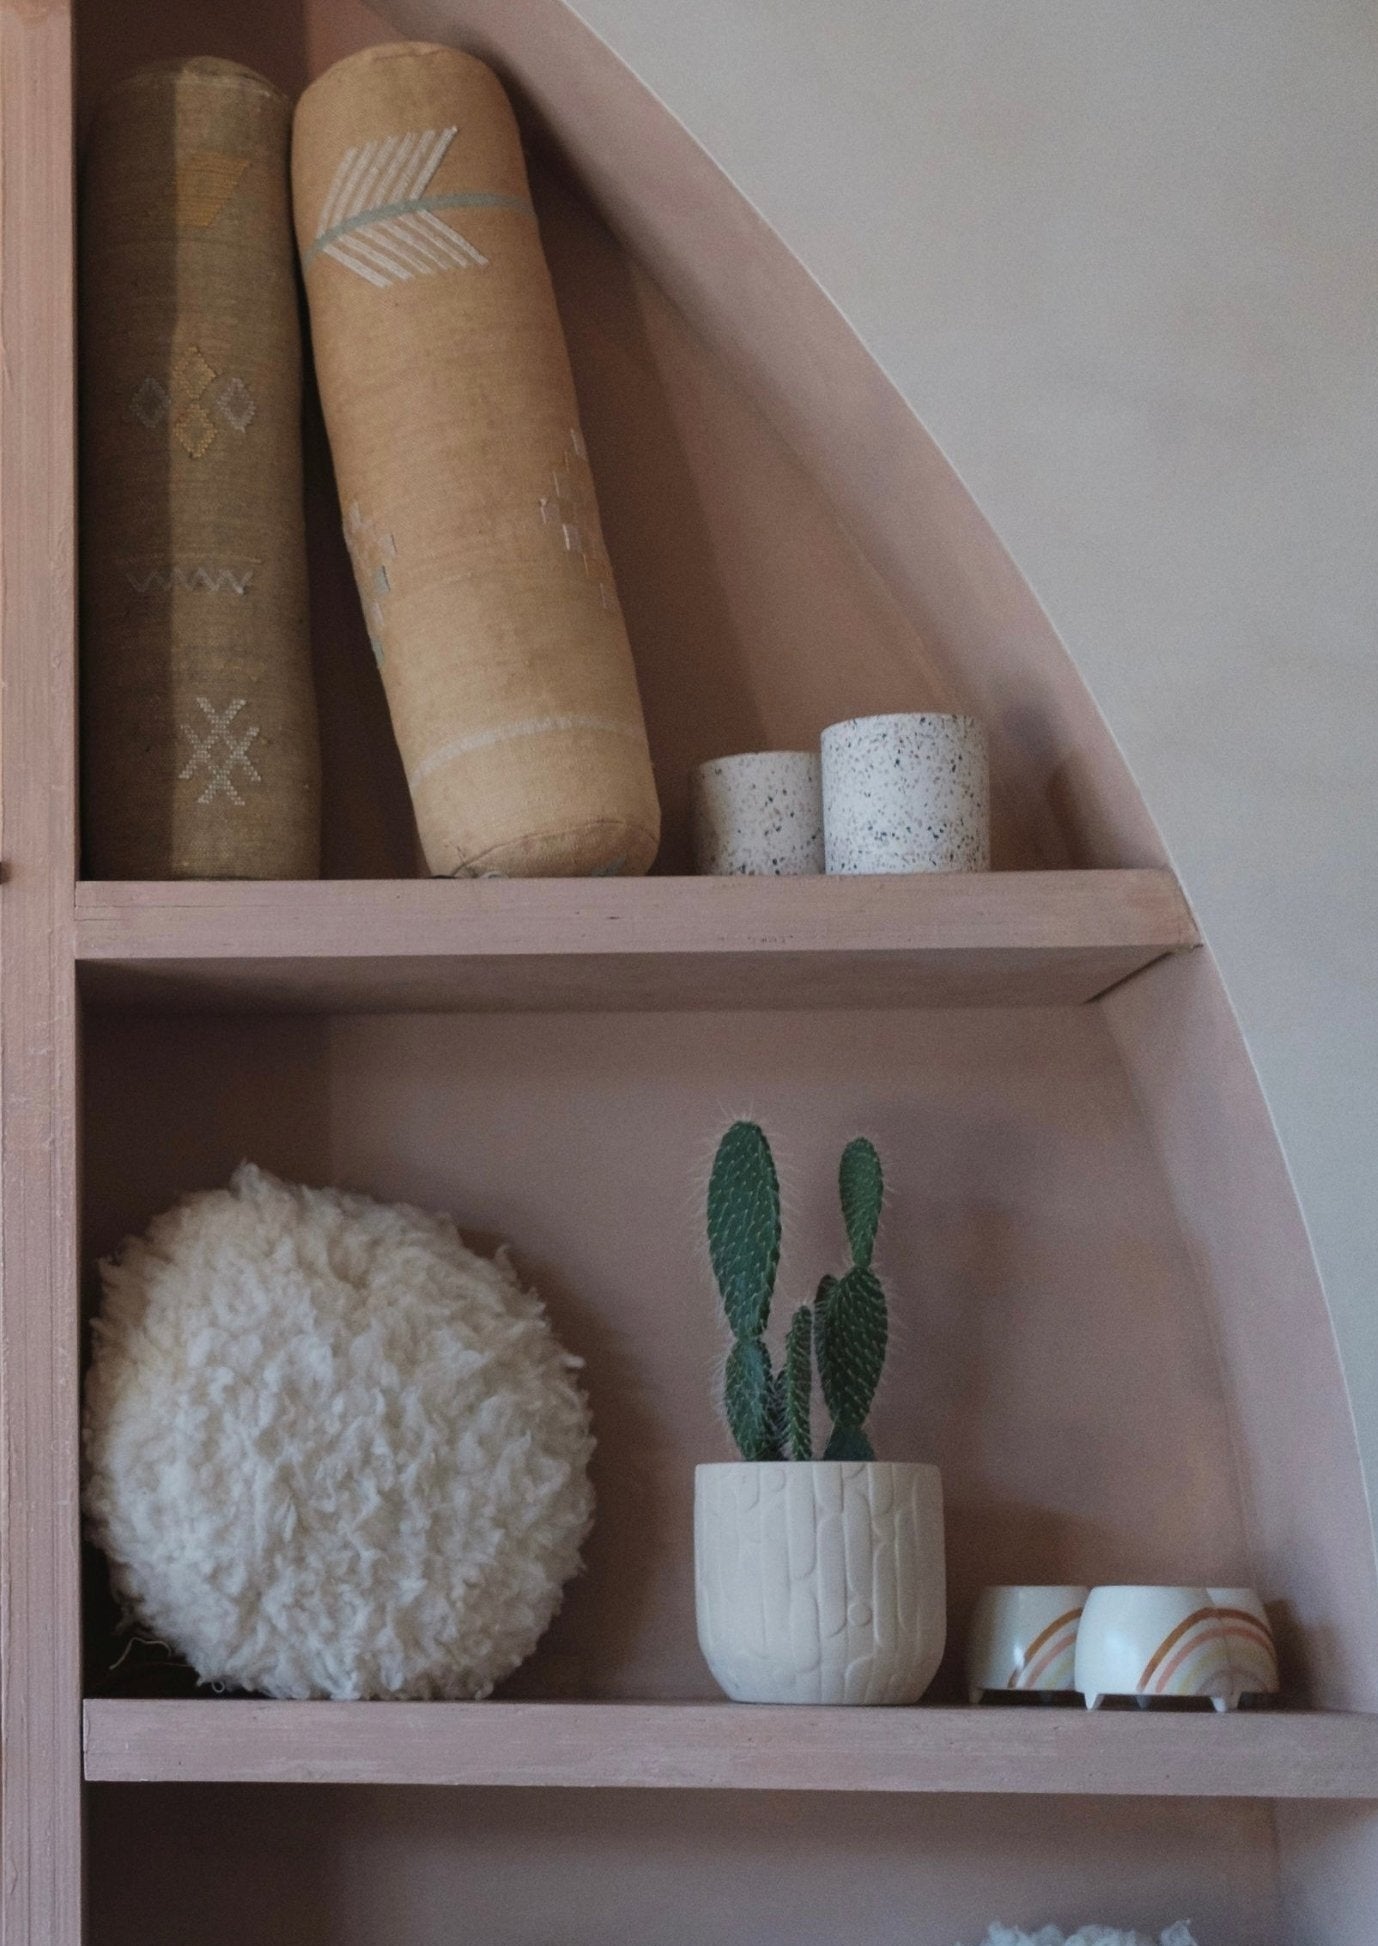 cactus silk pillow paired with sheep pillow displayed in portland shop origin story inside an arch wall. cactus plant and white accent pot holders sit next to them. 